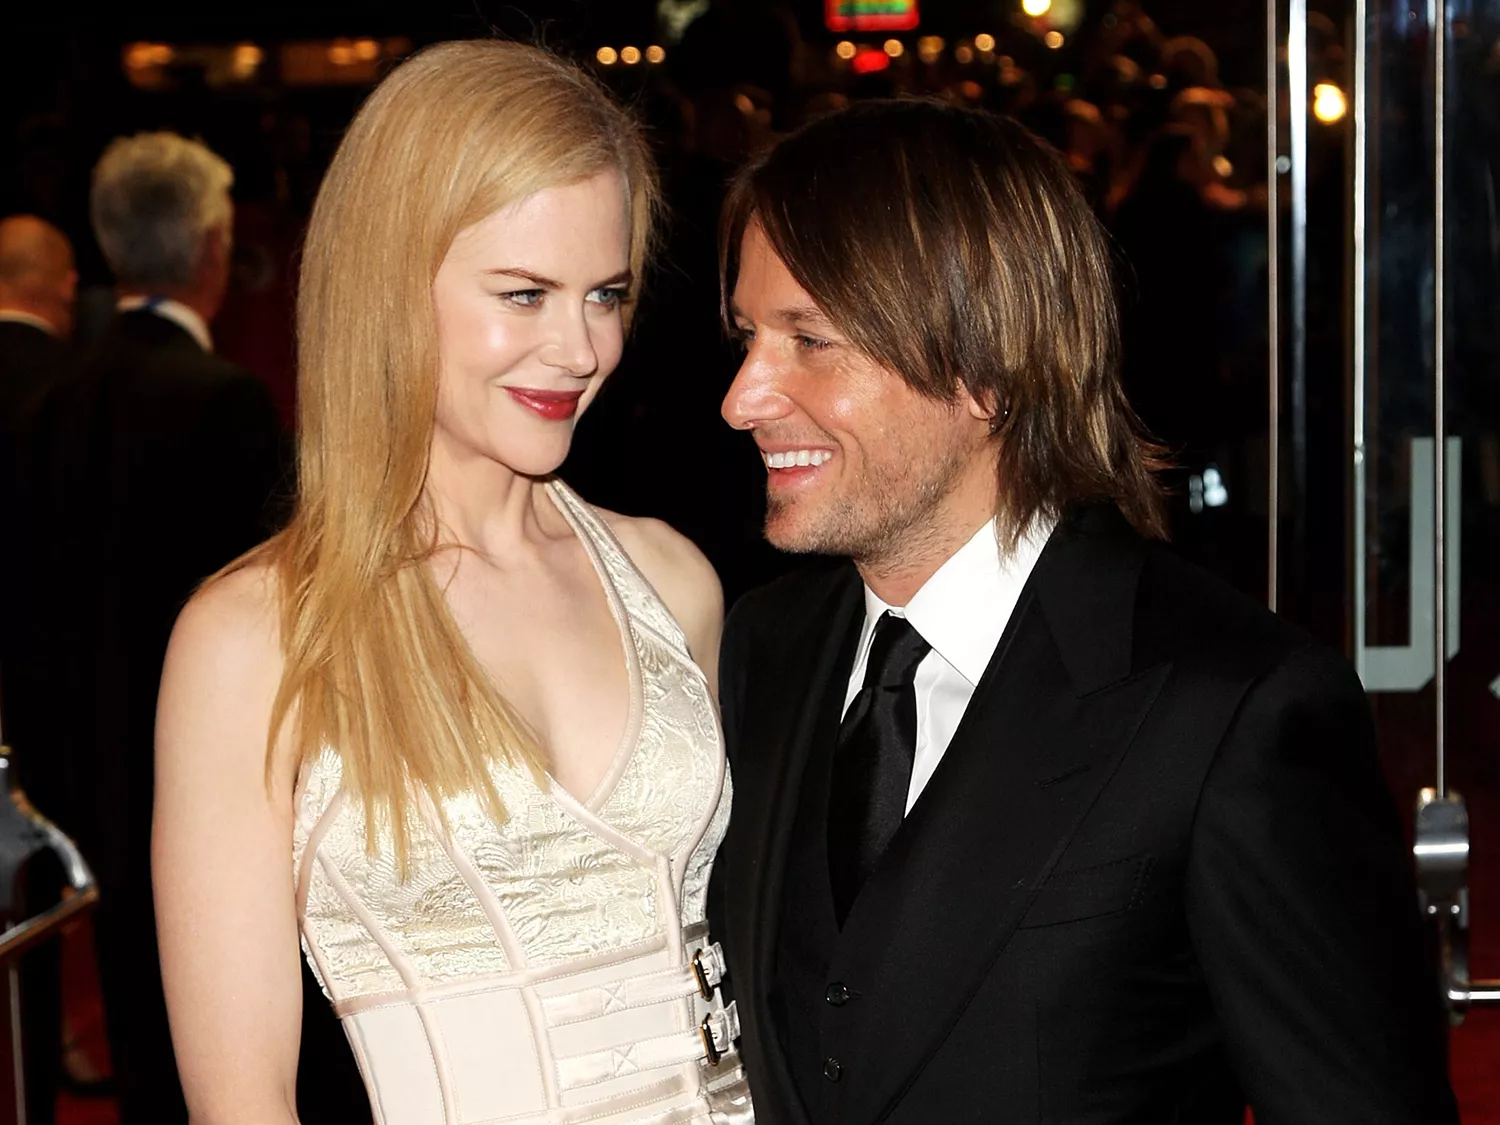 Keith Urban Says Wife Nicole Kidman Didn’t Expect Her Fan-Favorite AMC Ad to Become ‘This Cultural Thing’